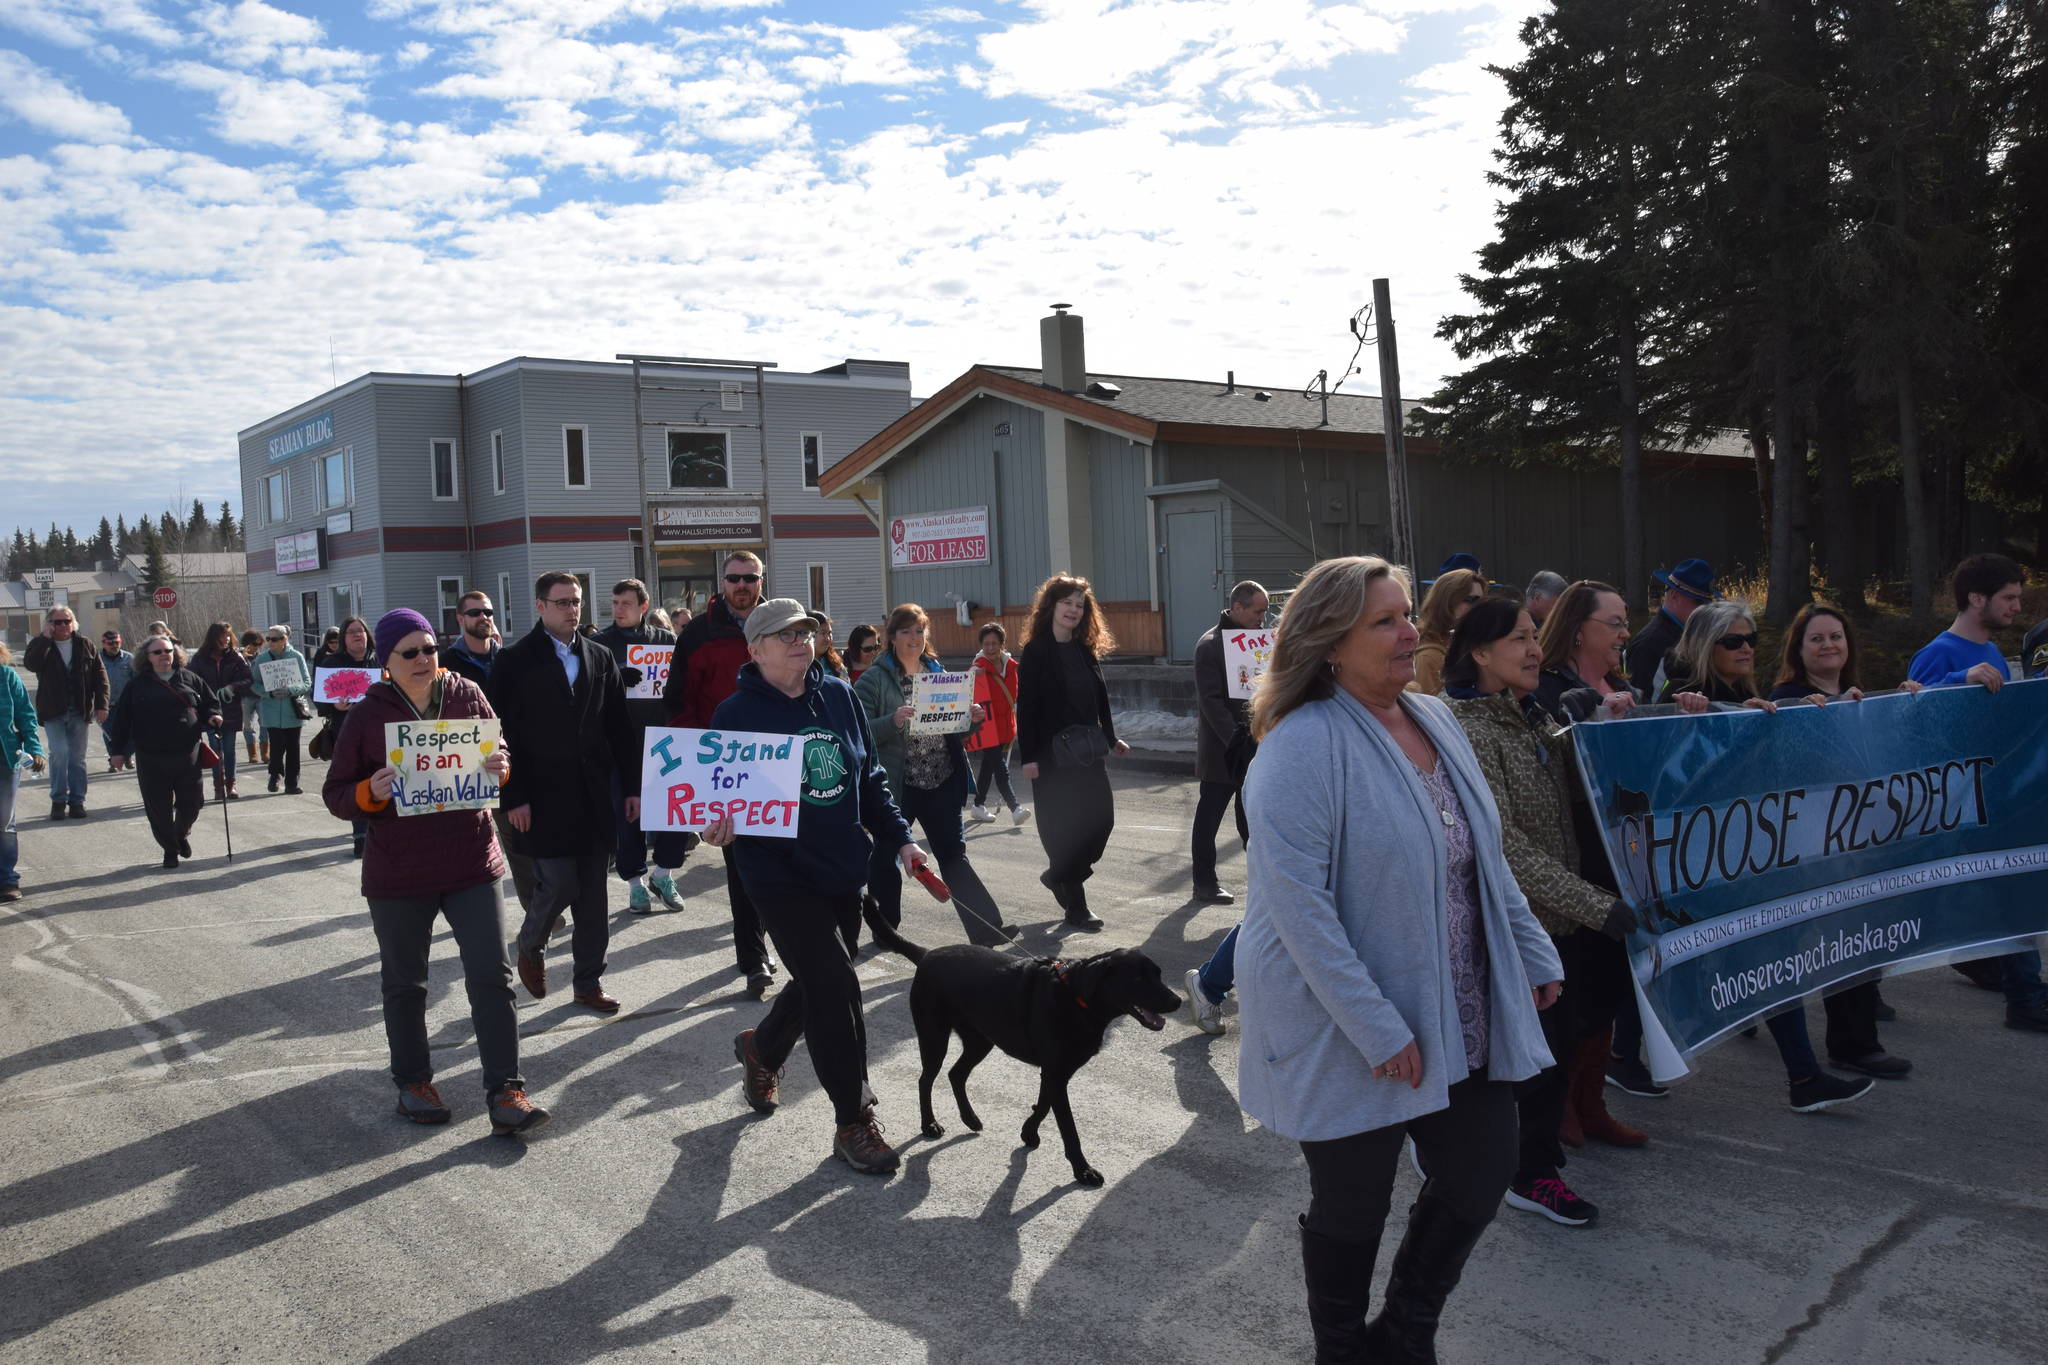 Peninsula residents participate in the annual Choose Respect March in Kenai, Alaska, on Wednesday, March 27, 2019. (Photo by Brian Mazurek/Peninsula Clarion)